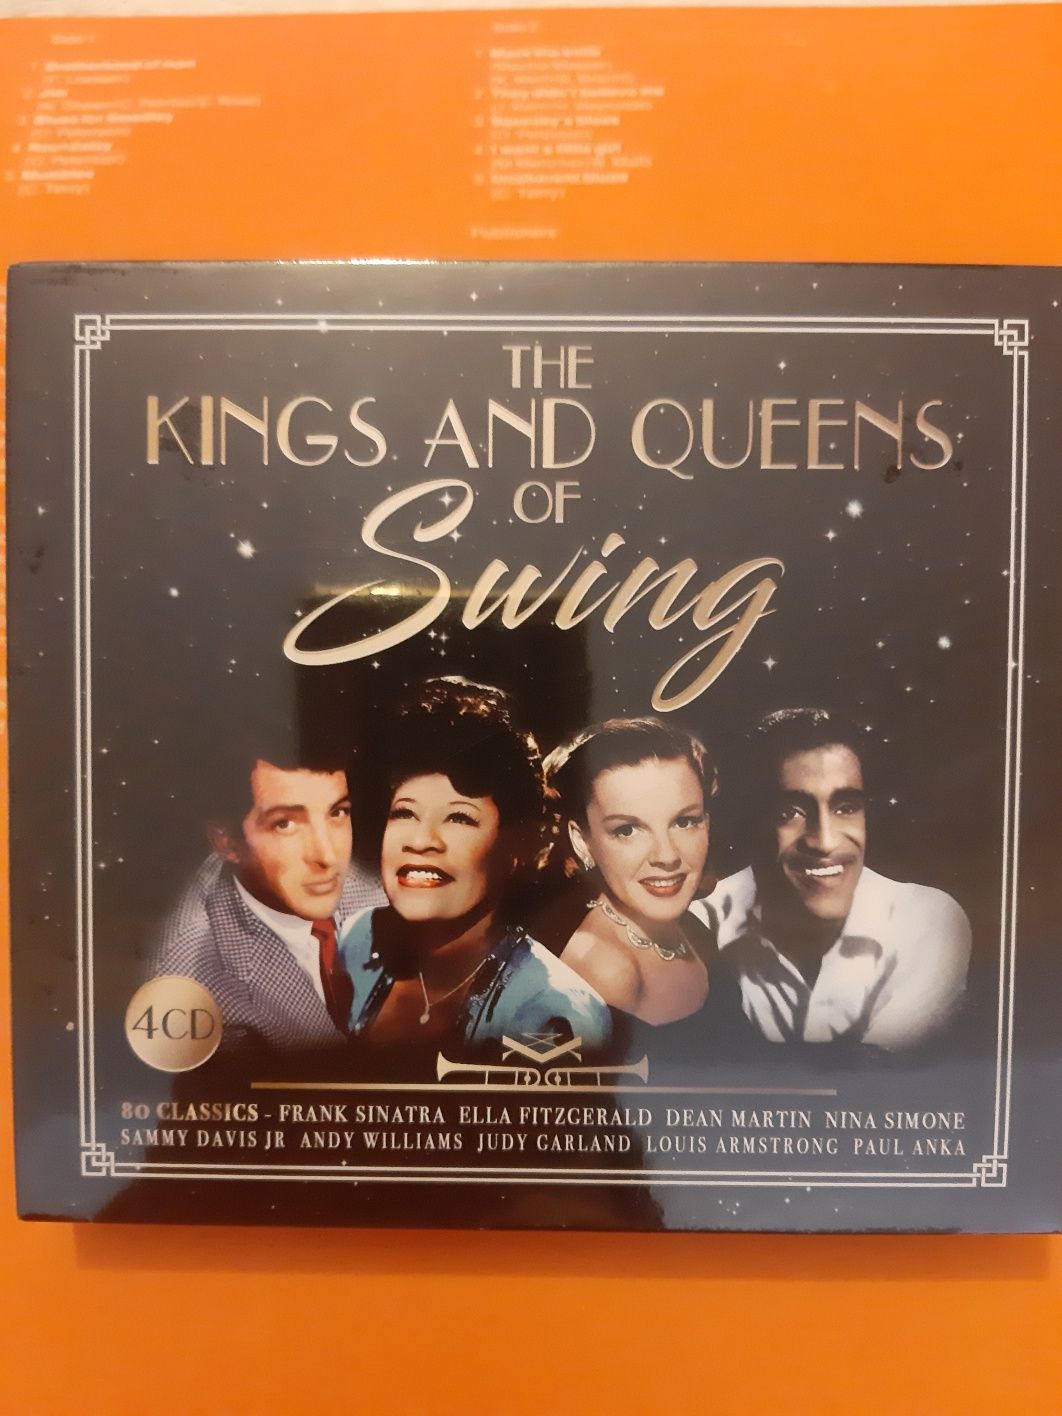 The King and Queens of Swing 4CD Nowy w folii